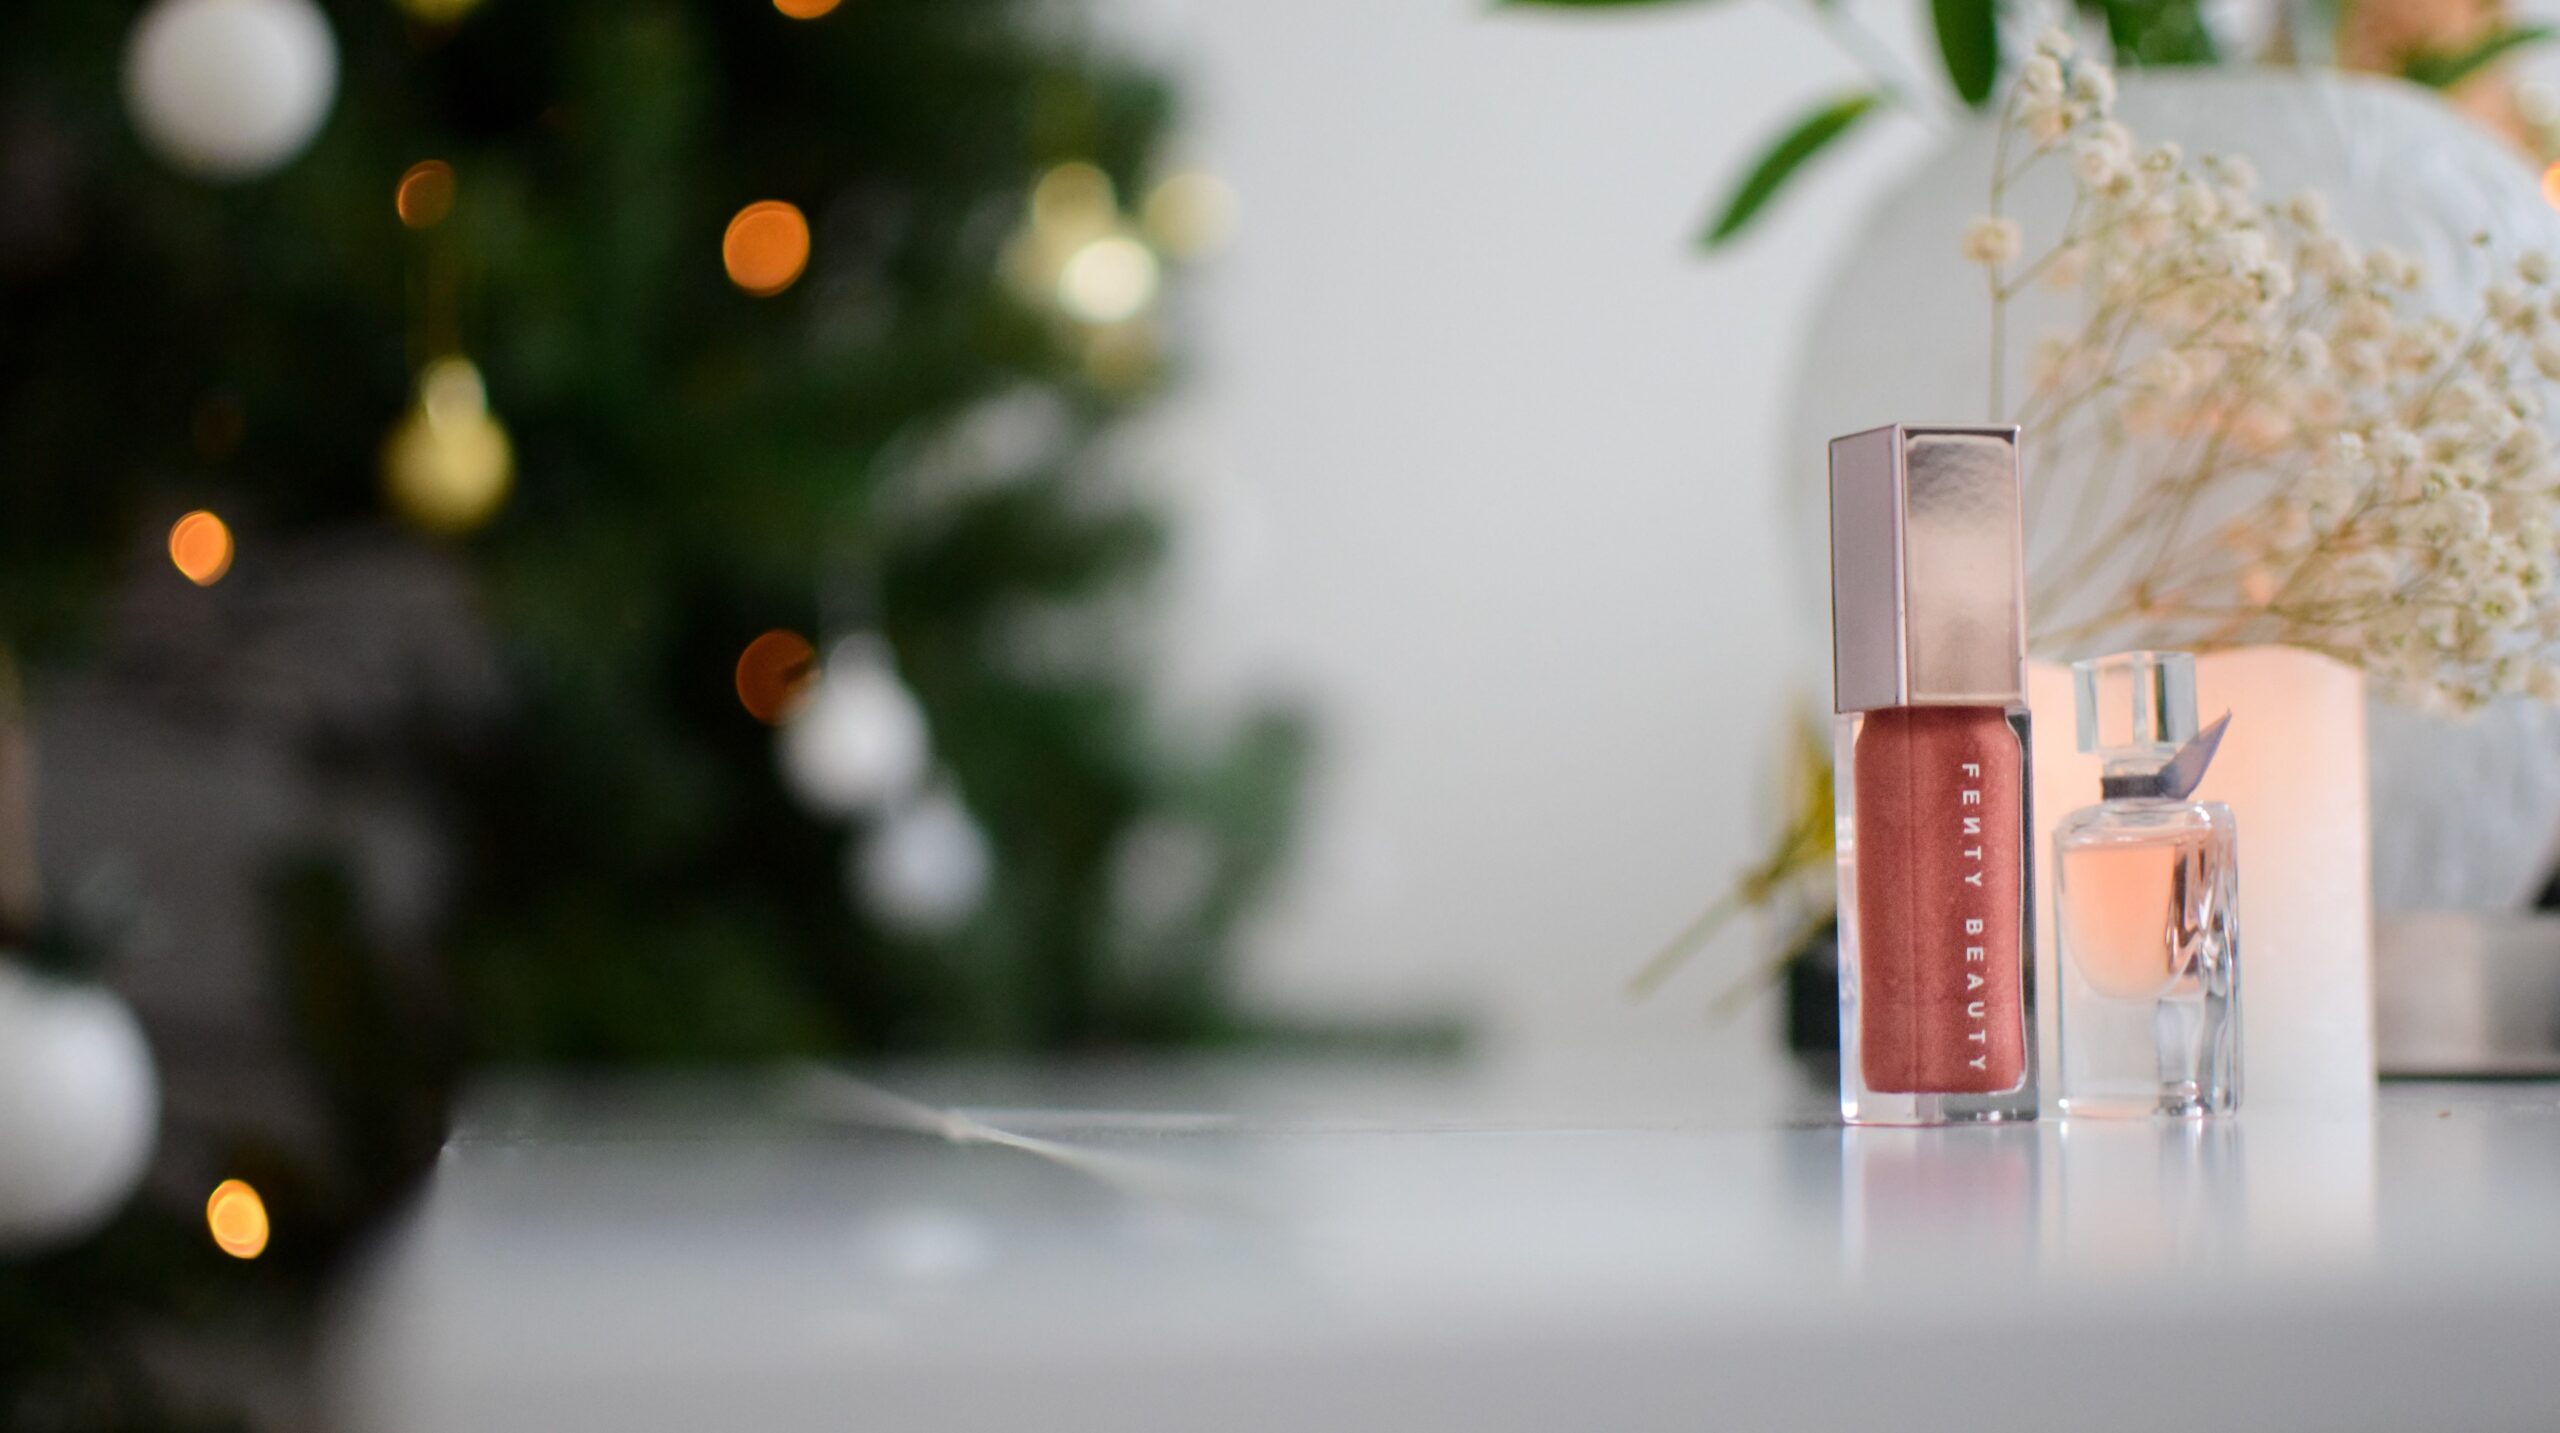 Fenty Beauty products in front of a blurred Christmas tree.